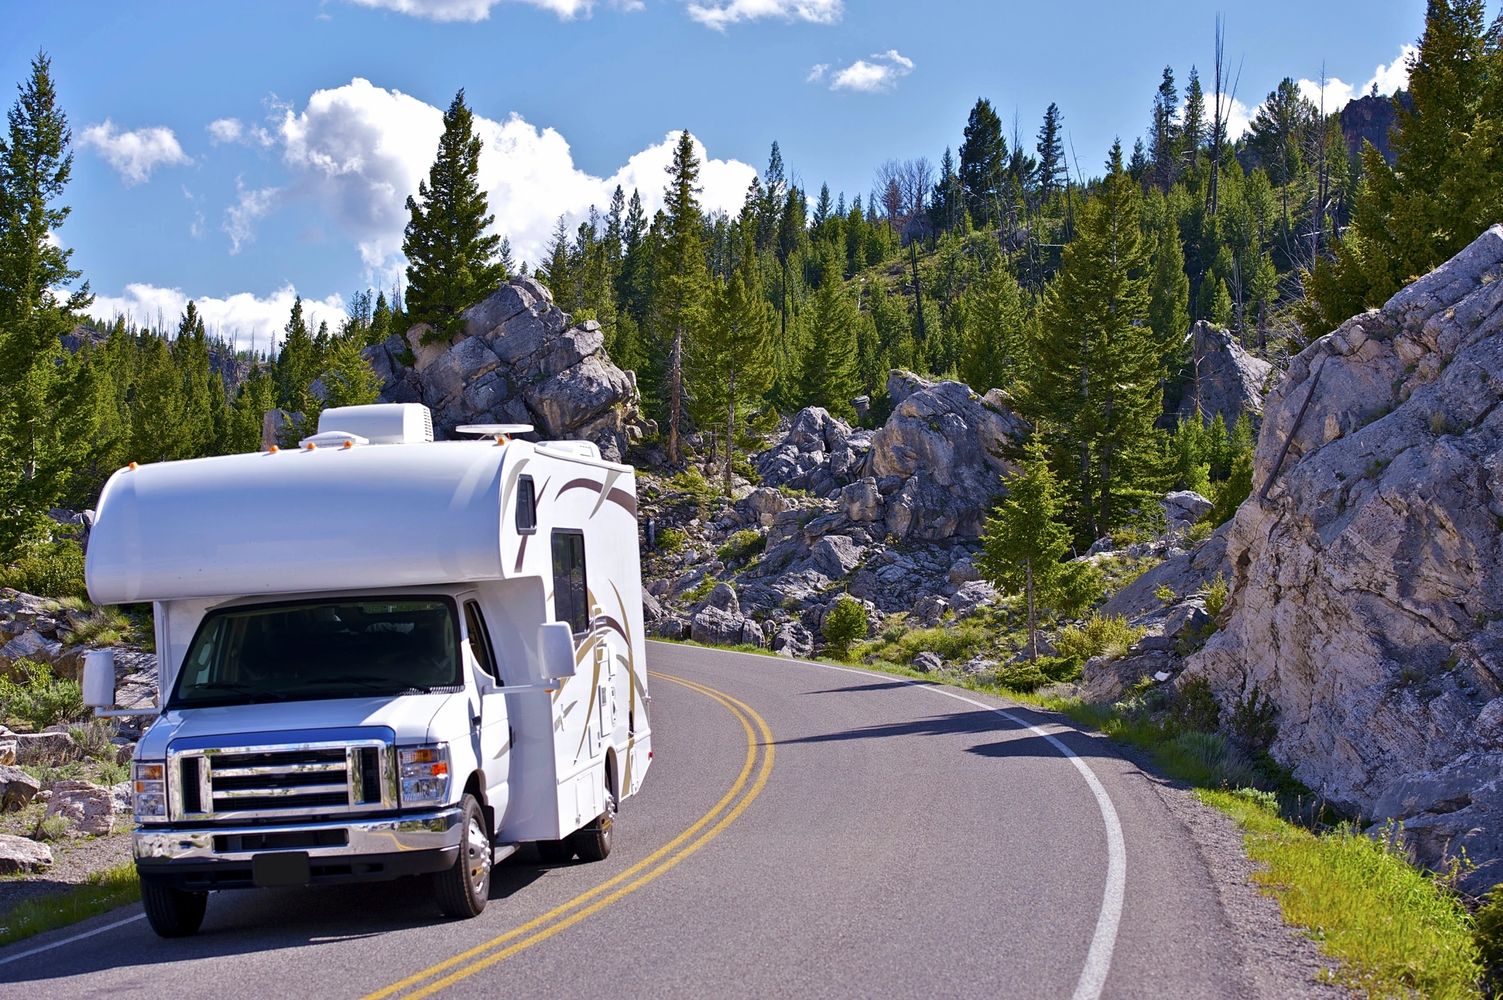 This RV rental is affordable luxury camping. A fully stocked motorhome for your family adventure.